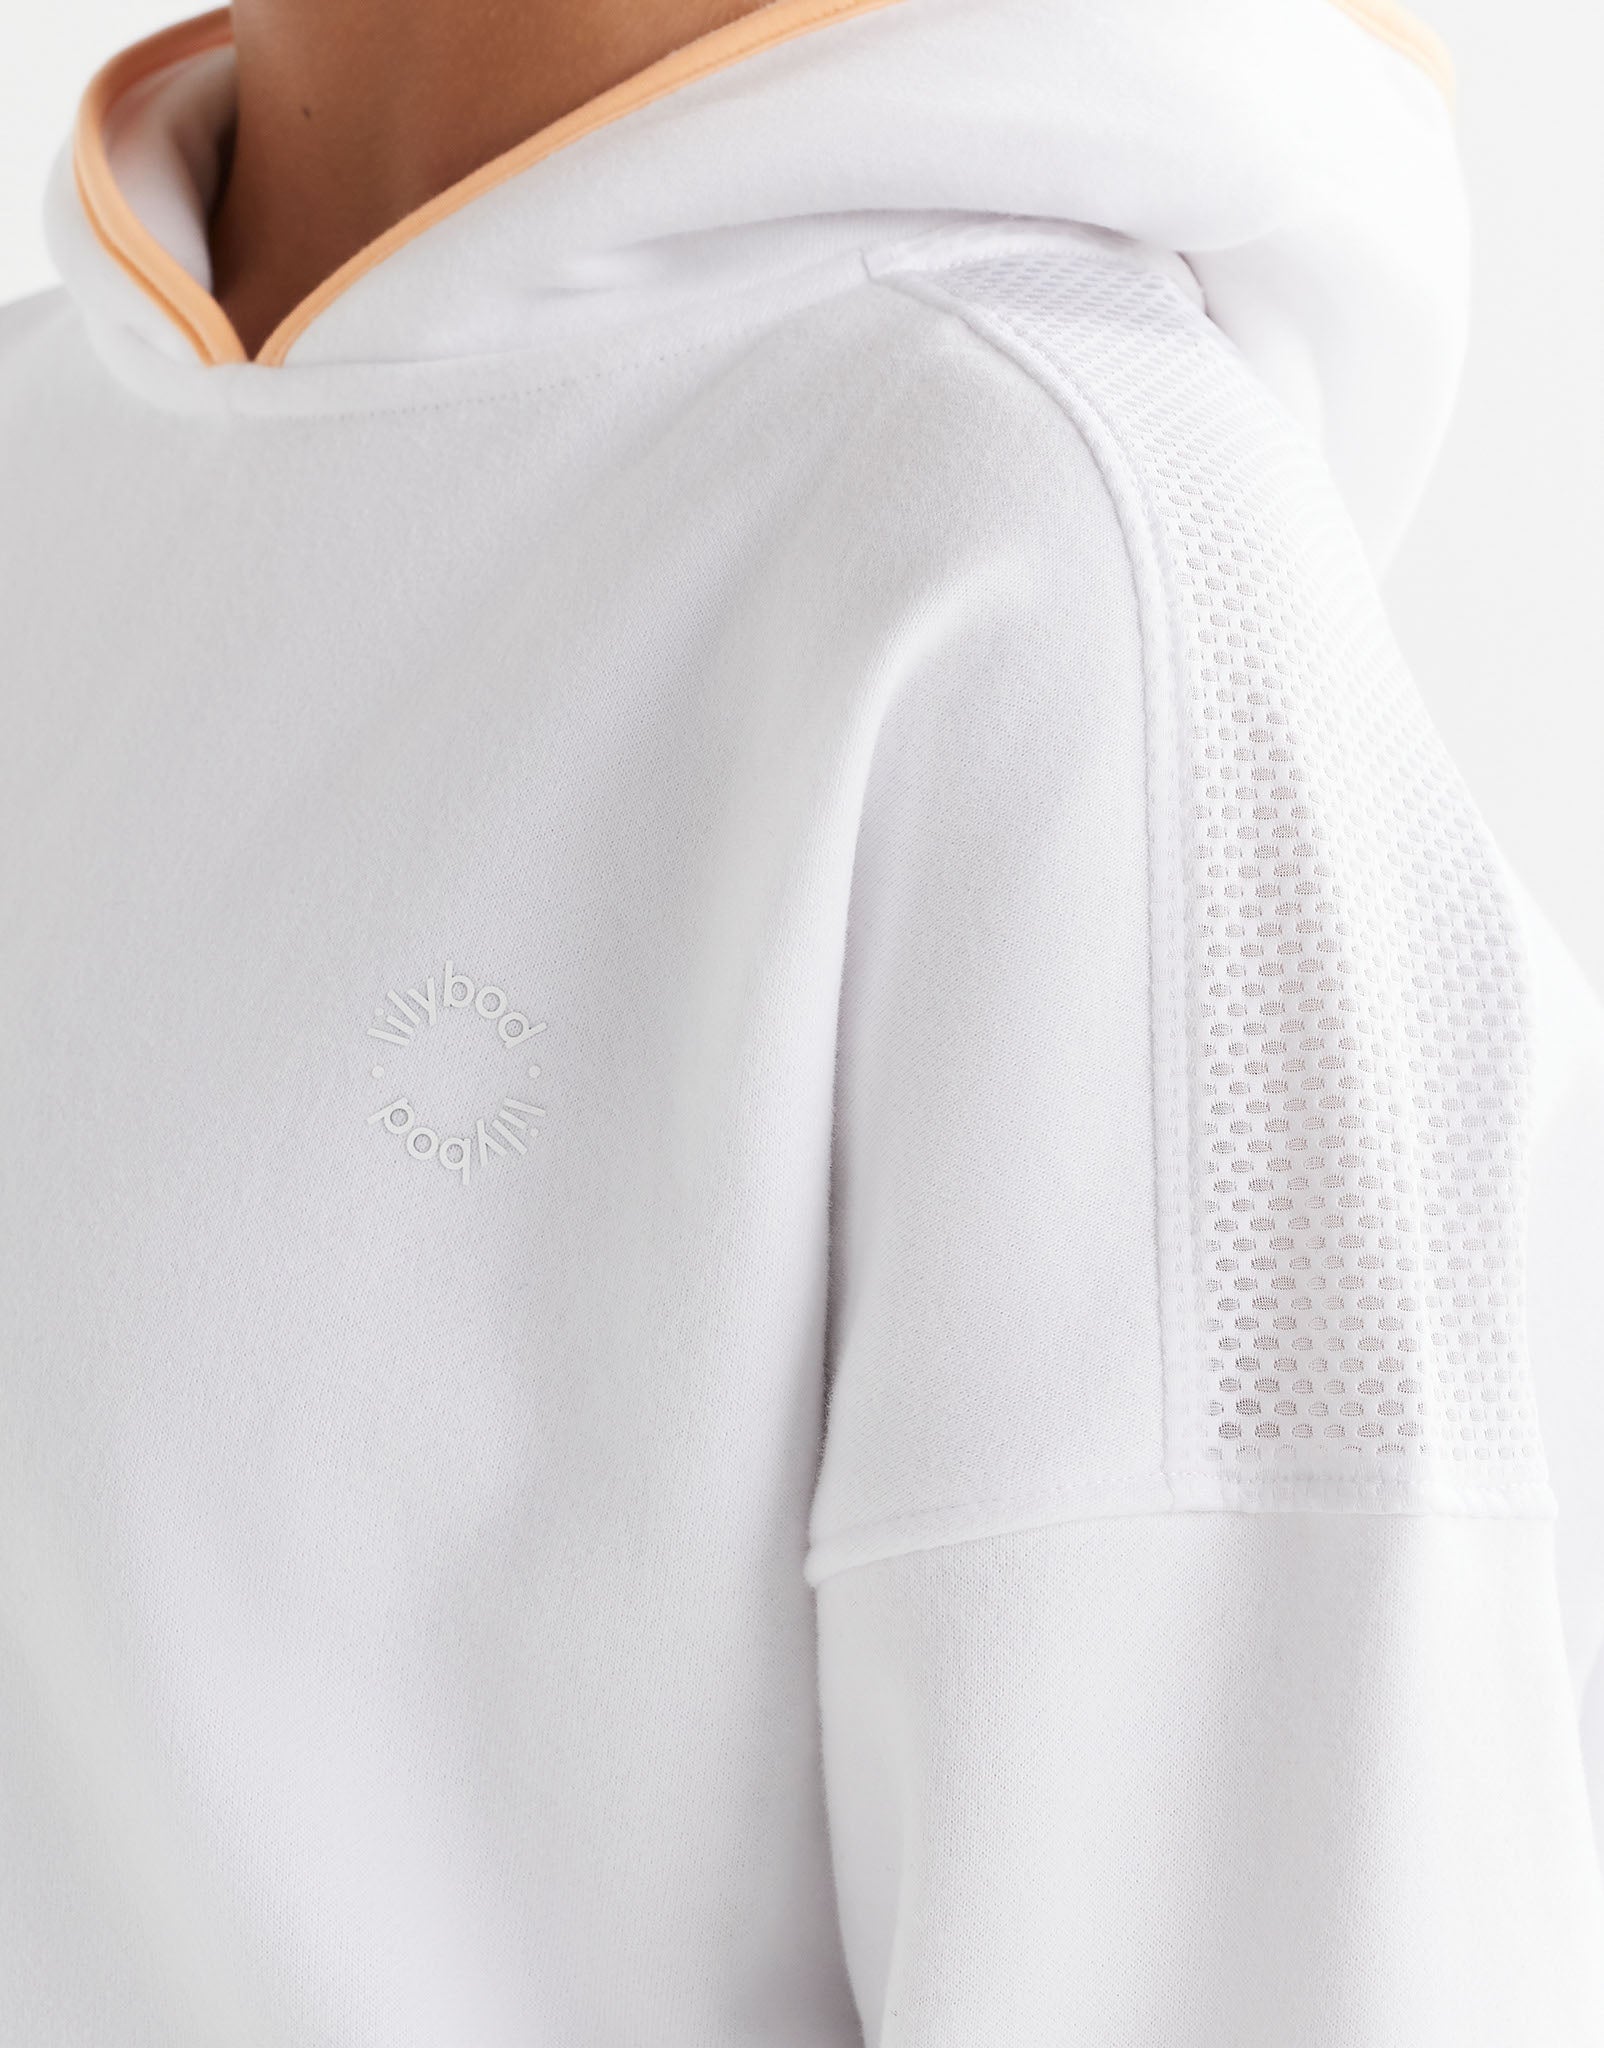 Lilybod-Lucy-Hooded-Sweat-White-LT68-C22-WT-7.jpeg